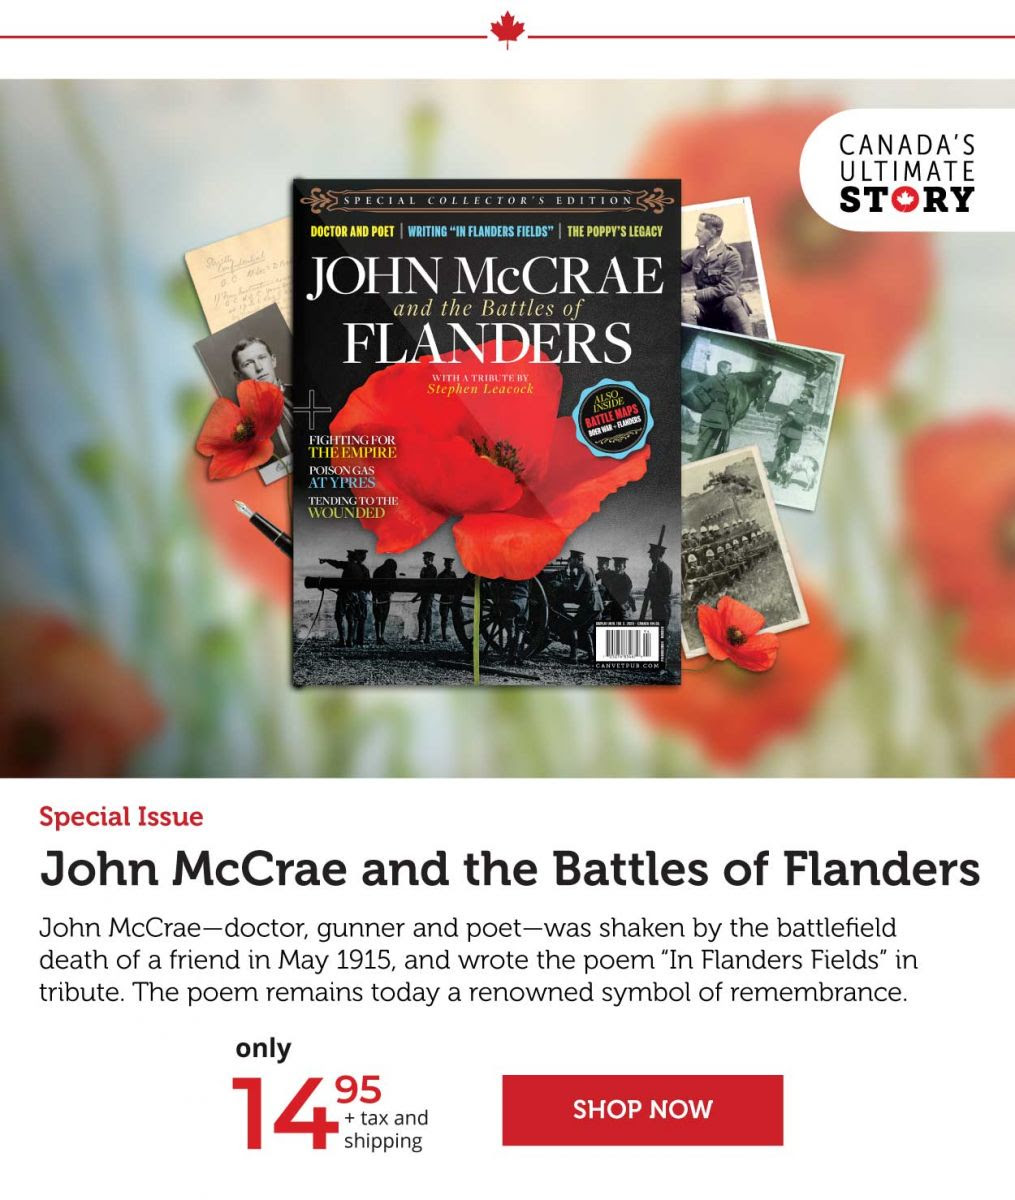 John McCraw and the Battles of Flanders